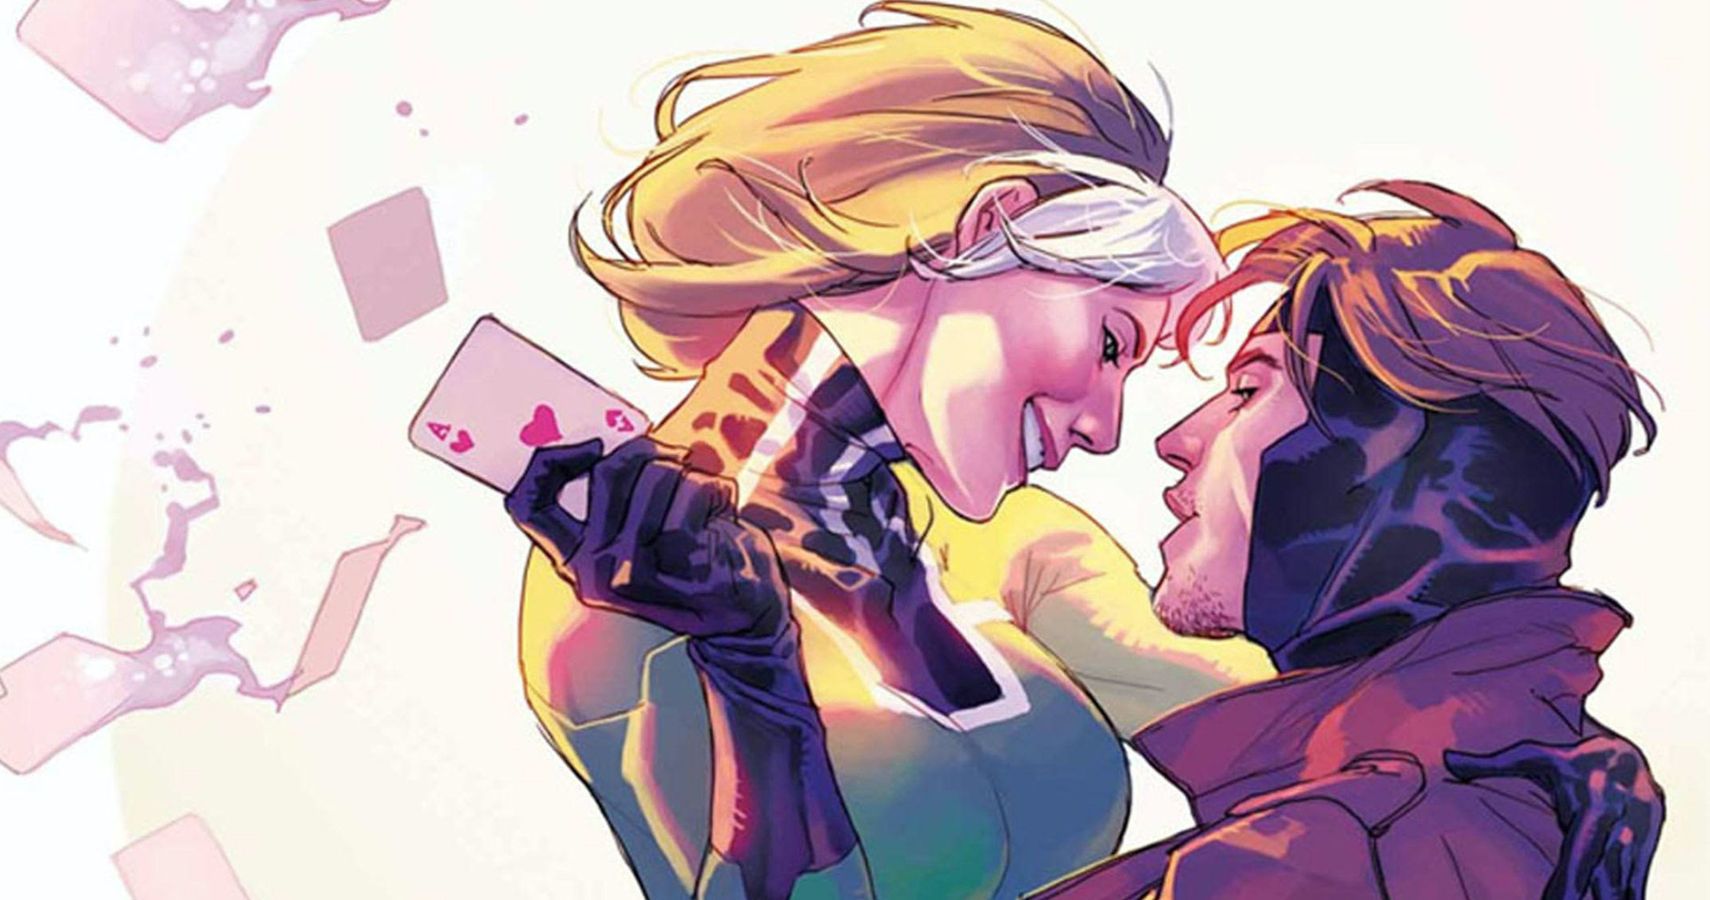 Exploring intimacy issues with Gambit and Rogue